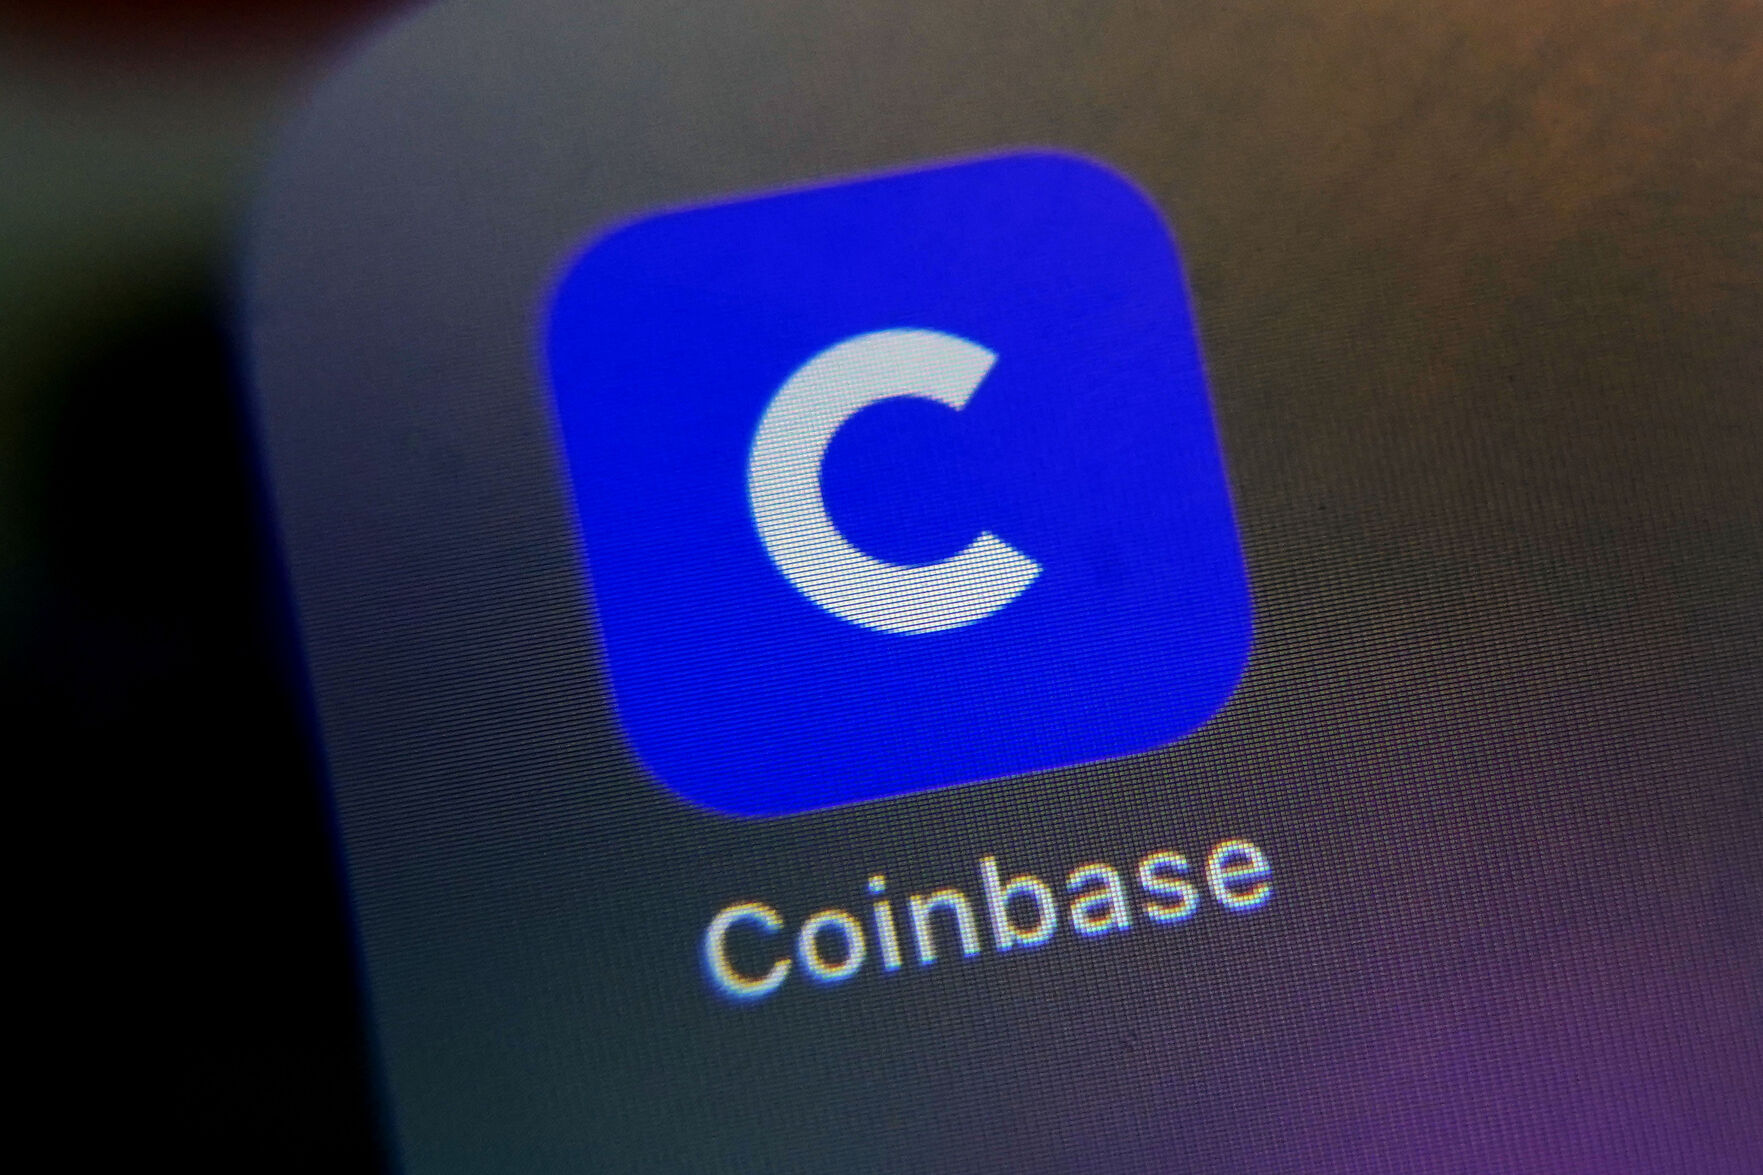 <p>File - The mobile phone icon for the Coinbase app is shown in this photo, in New York, Tuesday, April 13, 2021. The Securities and Exchange Commission is charging Coinbase with operating its crypto asset trading platform as an unregistered national securities exchange, broker, and clearing agency. (AP Photo/Richard Drew, File)</p>   PHOTO CREDIT: Richard Drew 